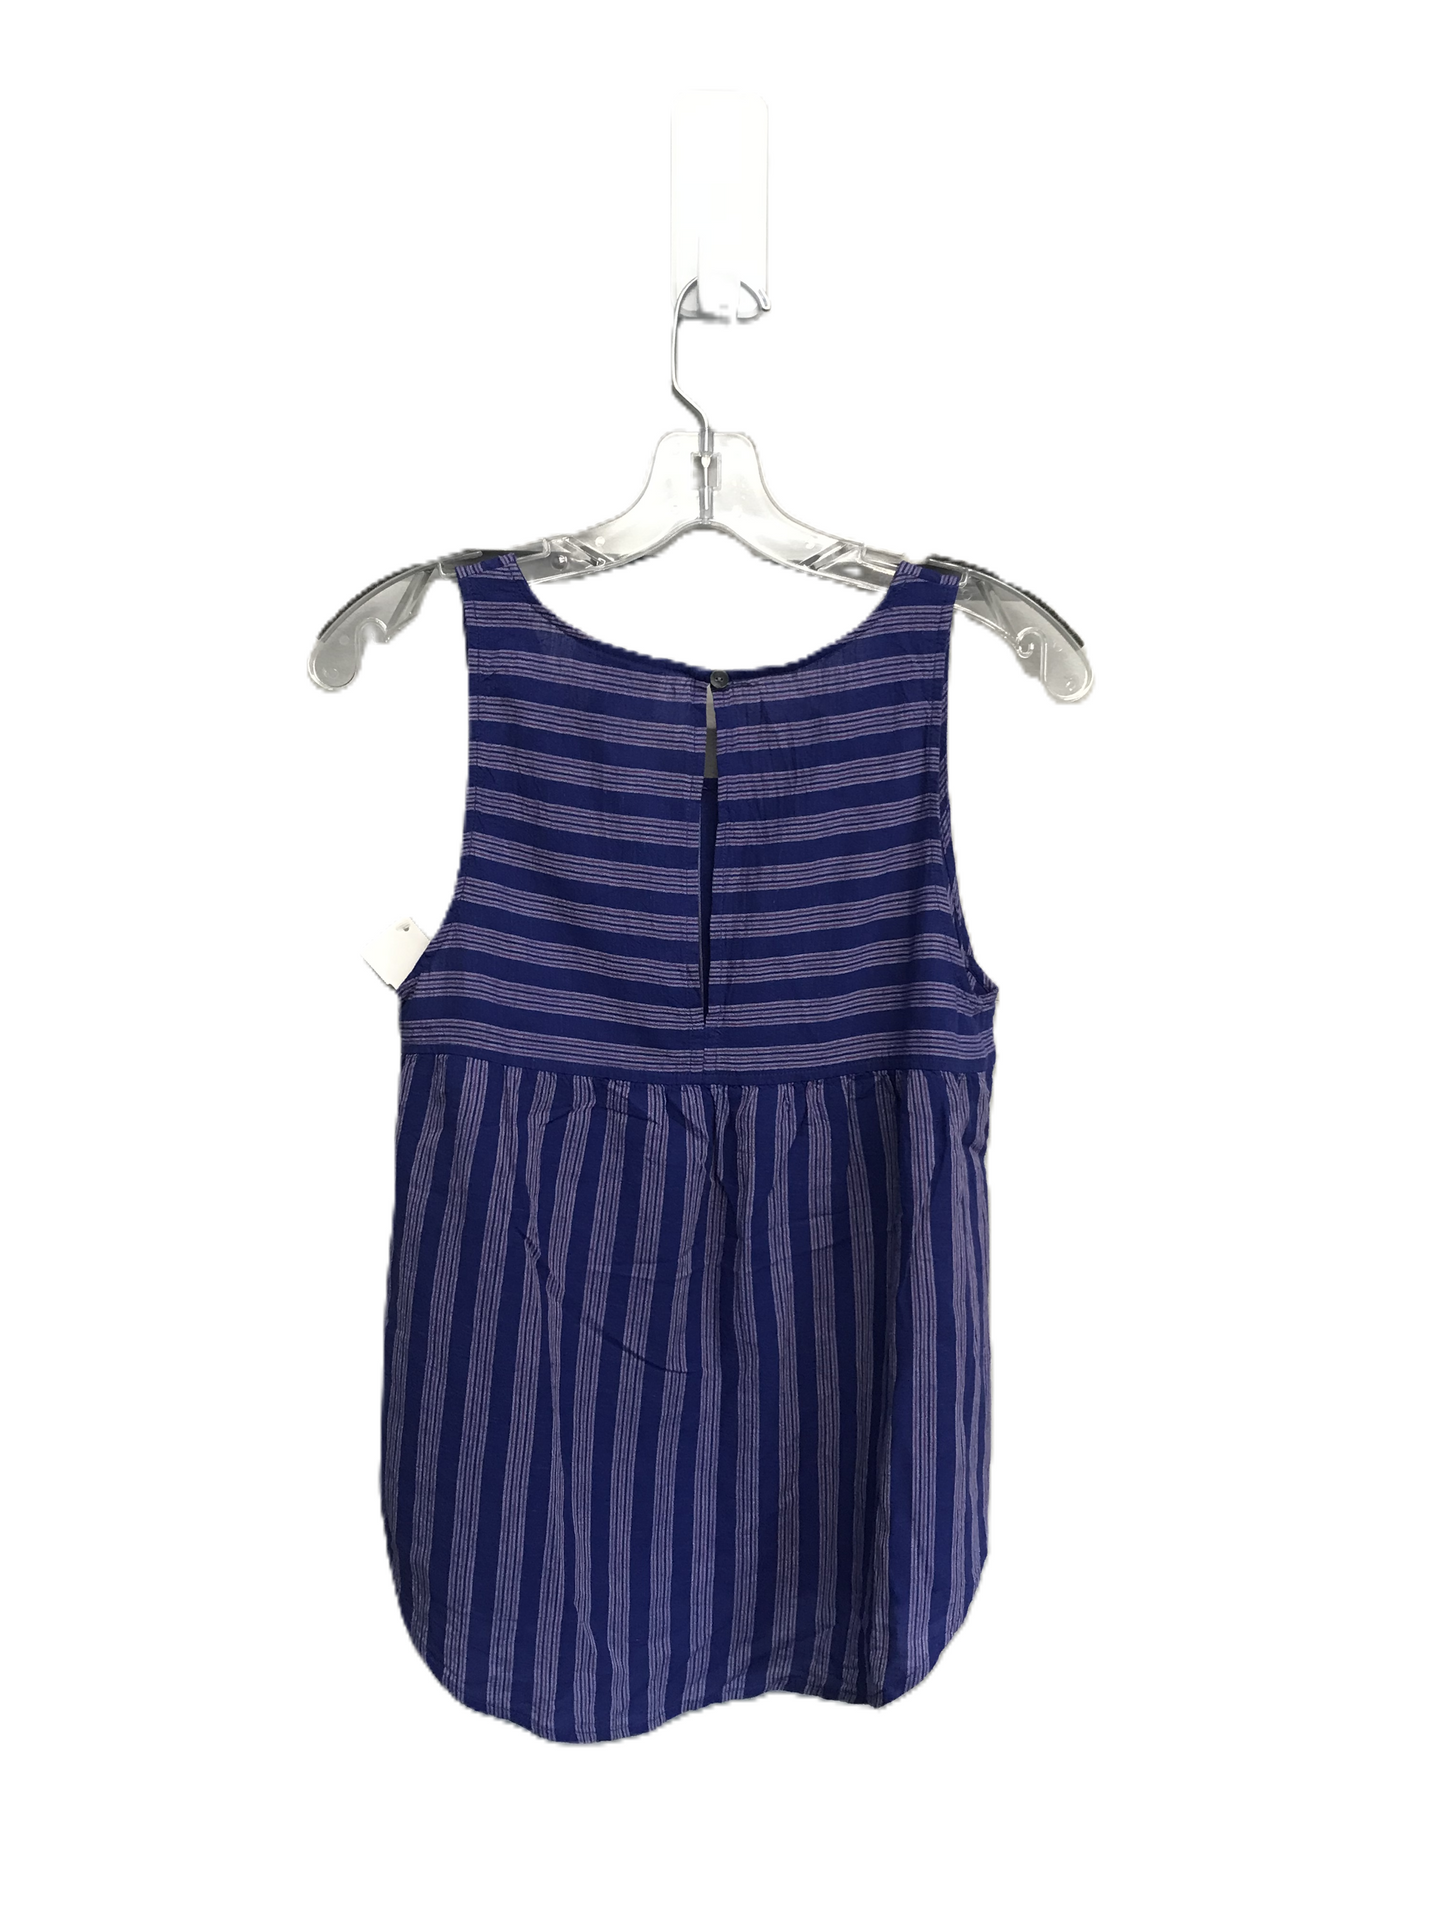 Striped Pattern Top Sleeveless By Universal Thread, Size: S